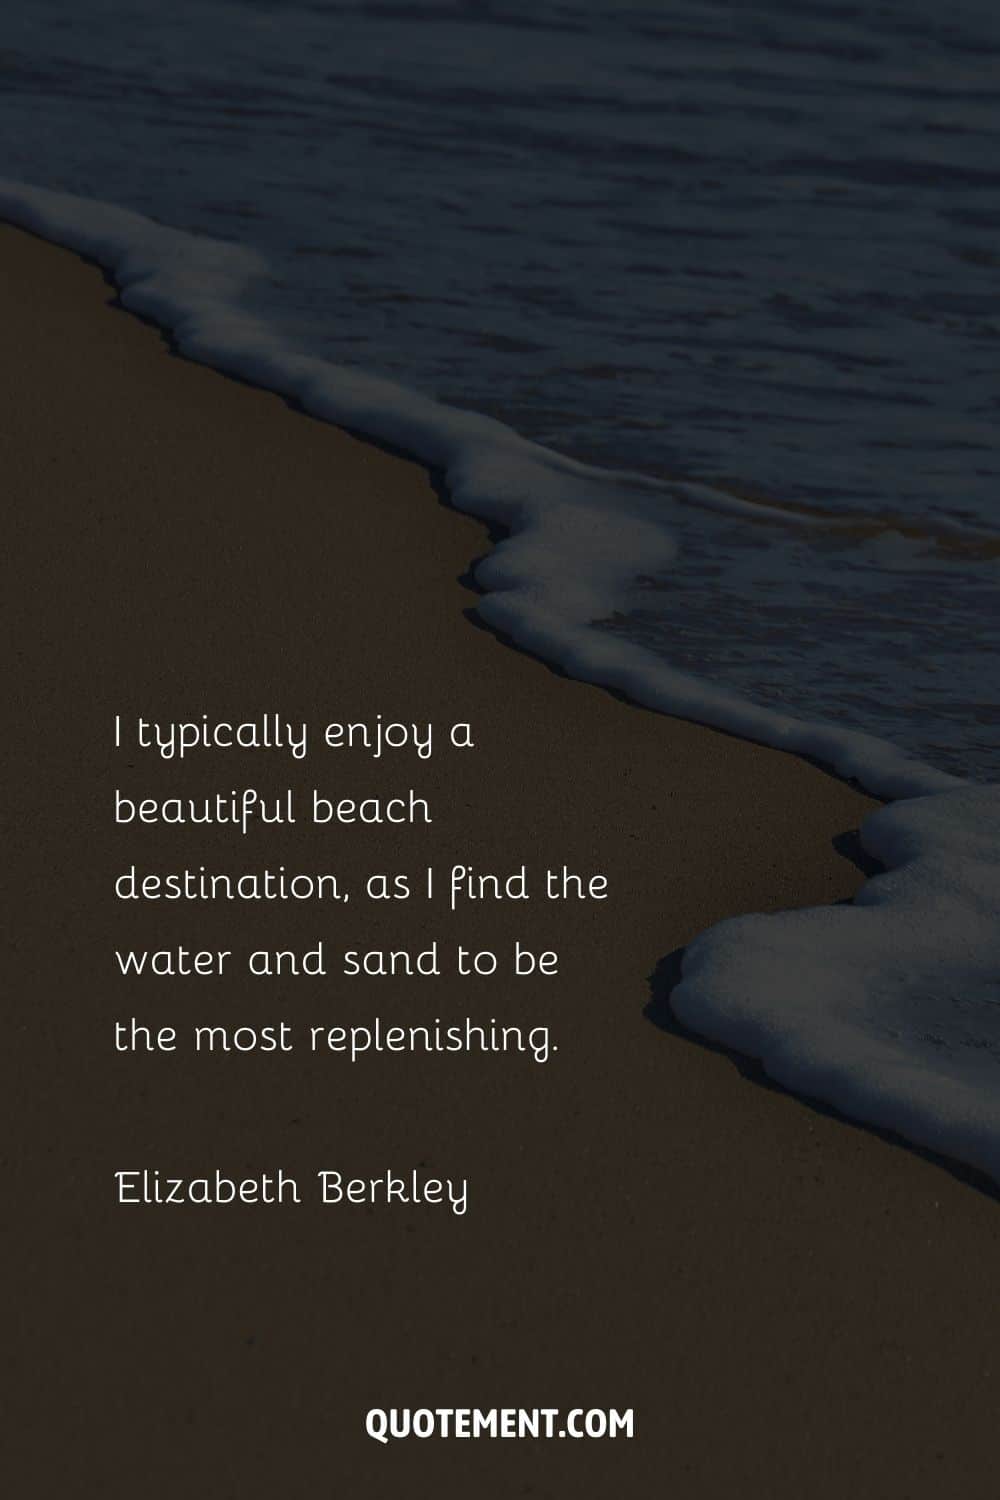 I typically enjoy a beautiful beach destination, as I find the water and sand to be the most replenishing. – Elizabeth Berkley